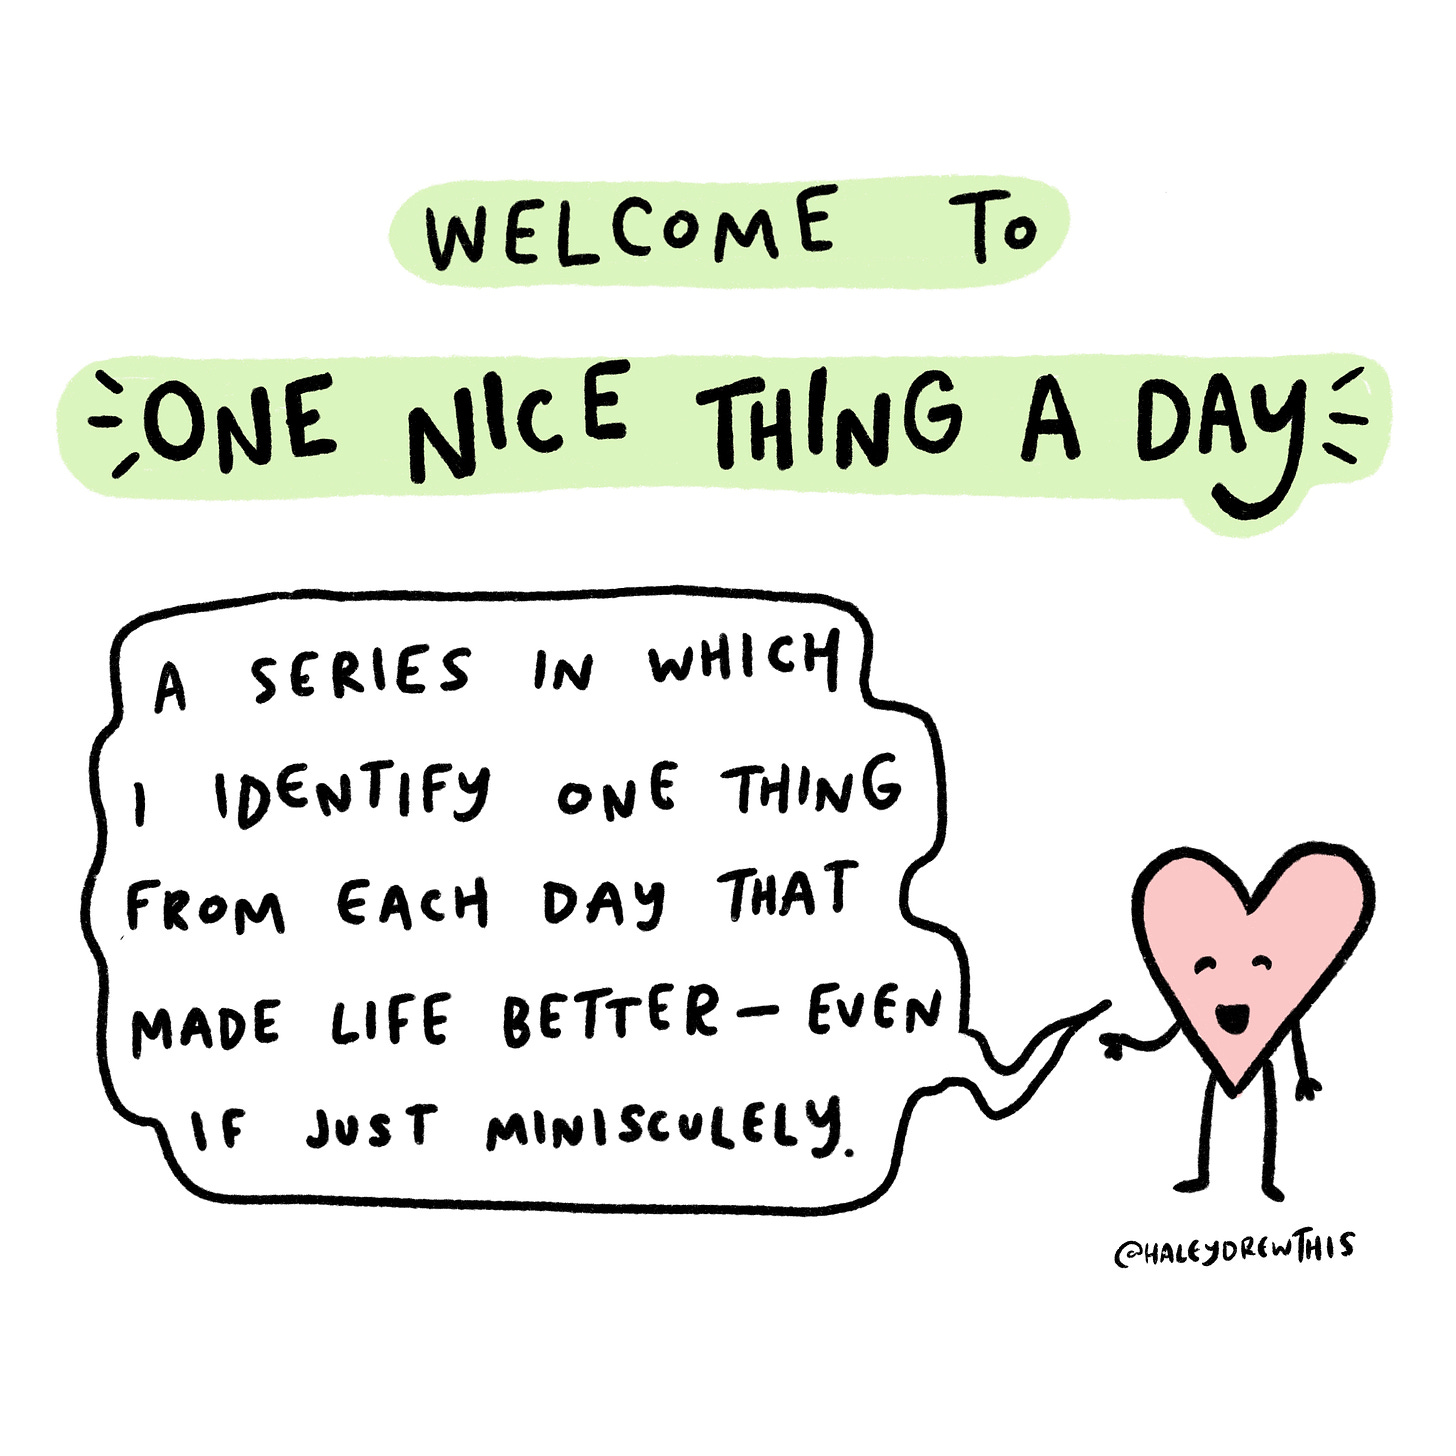 Welcome to one nice thing a day